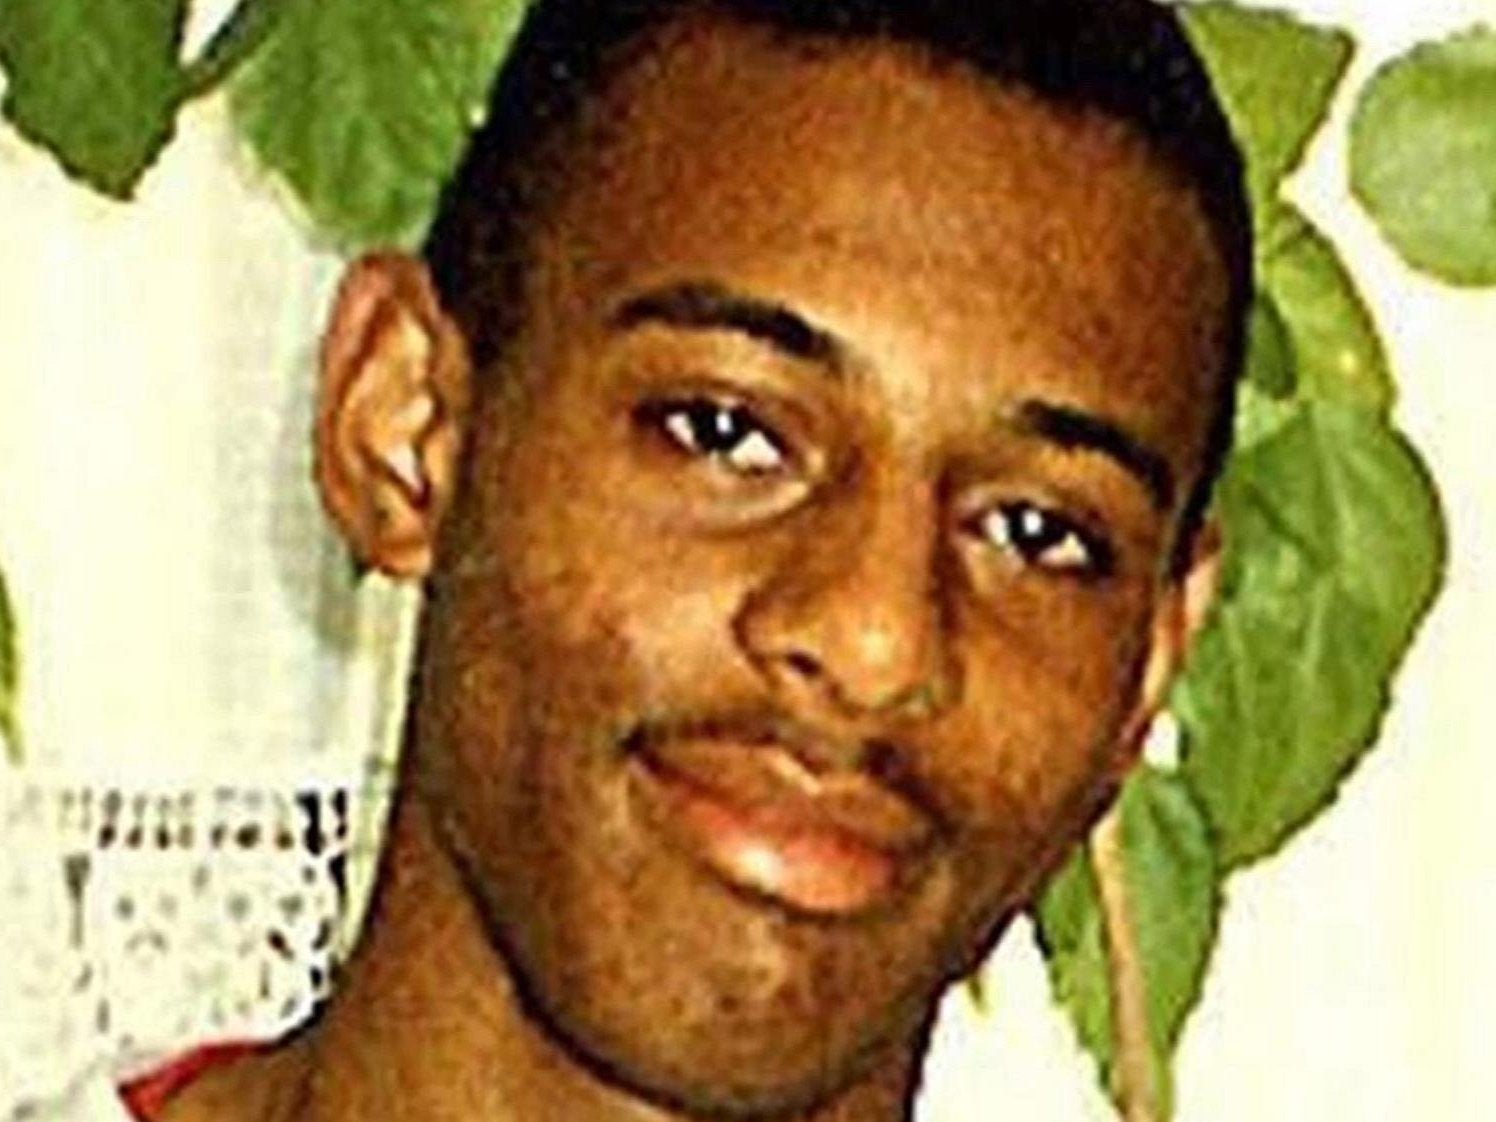 Stephen Lawrence&apos;s parents call for young people to reject violence on first memorial day for murdered black teenager